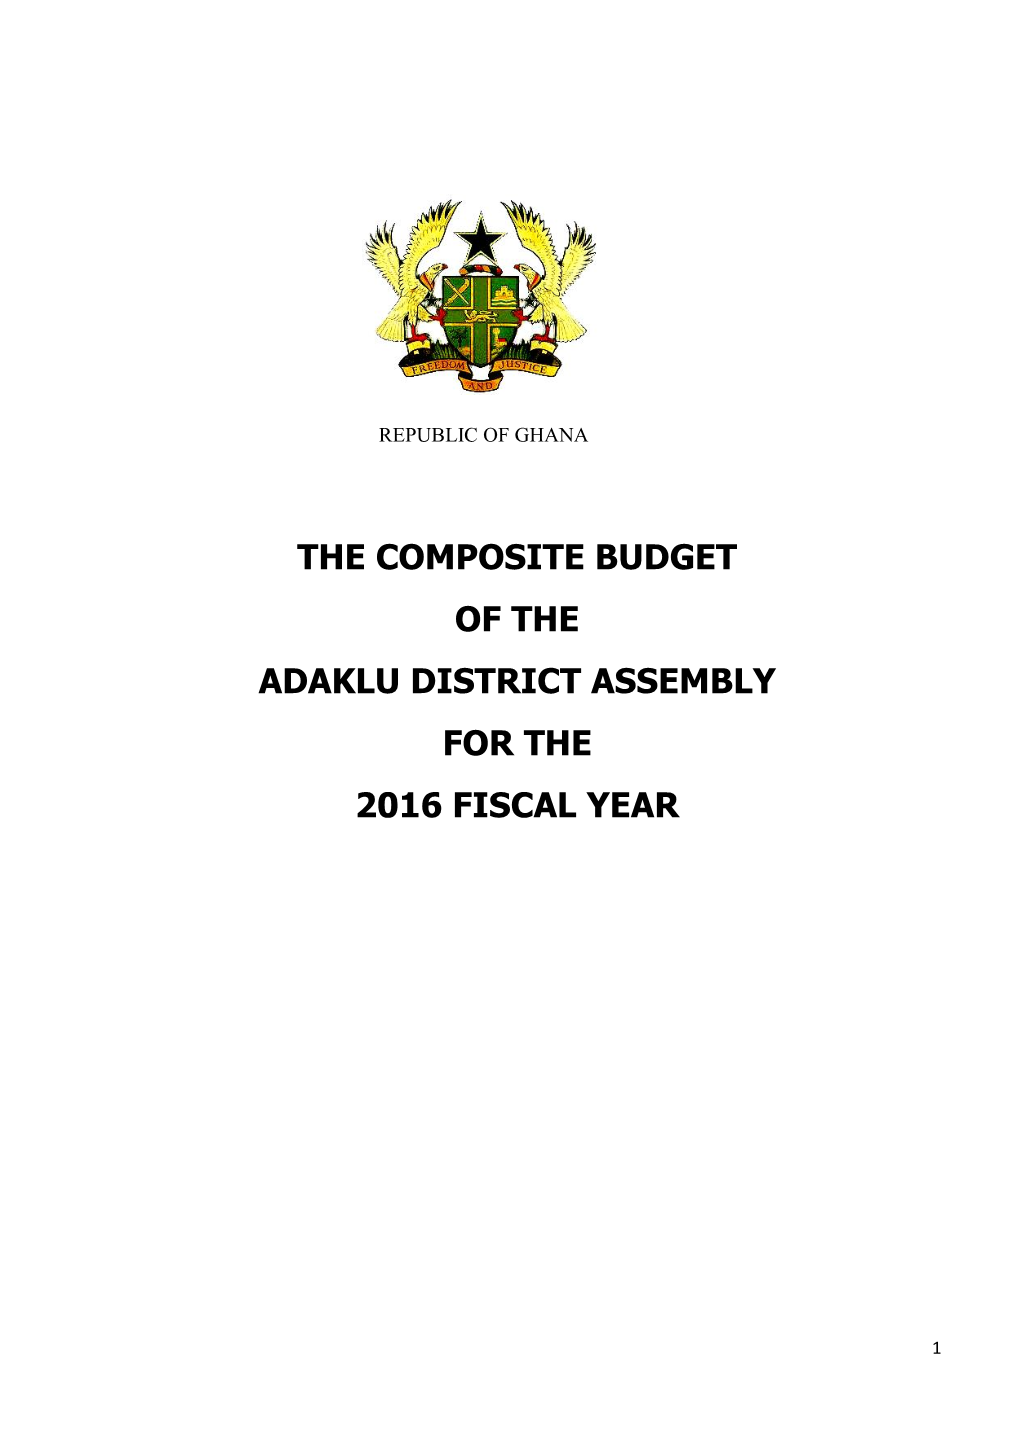 The Composite Budget of the Adaklu District Assembly for the 2016 Fiscal Year